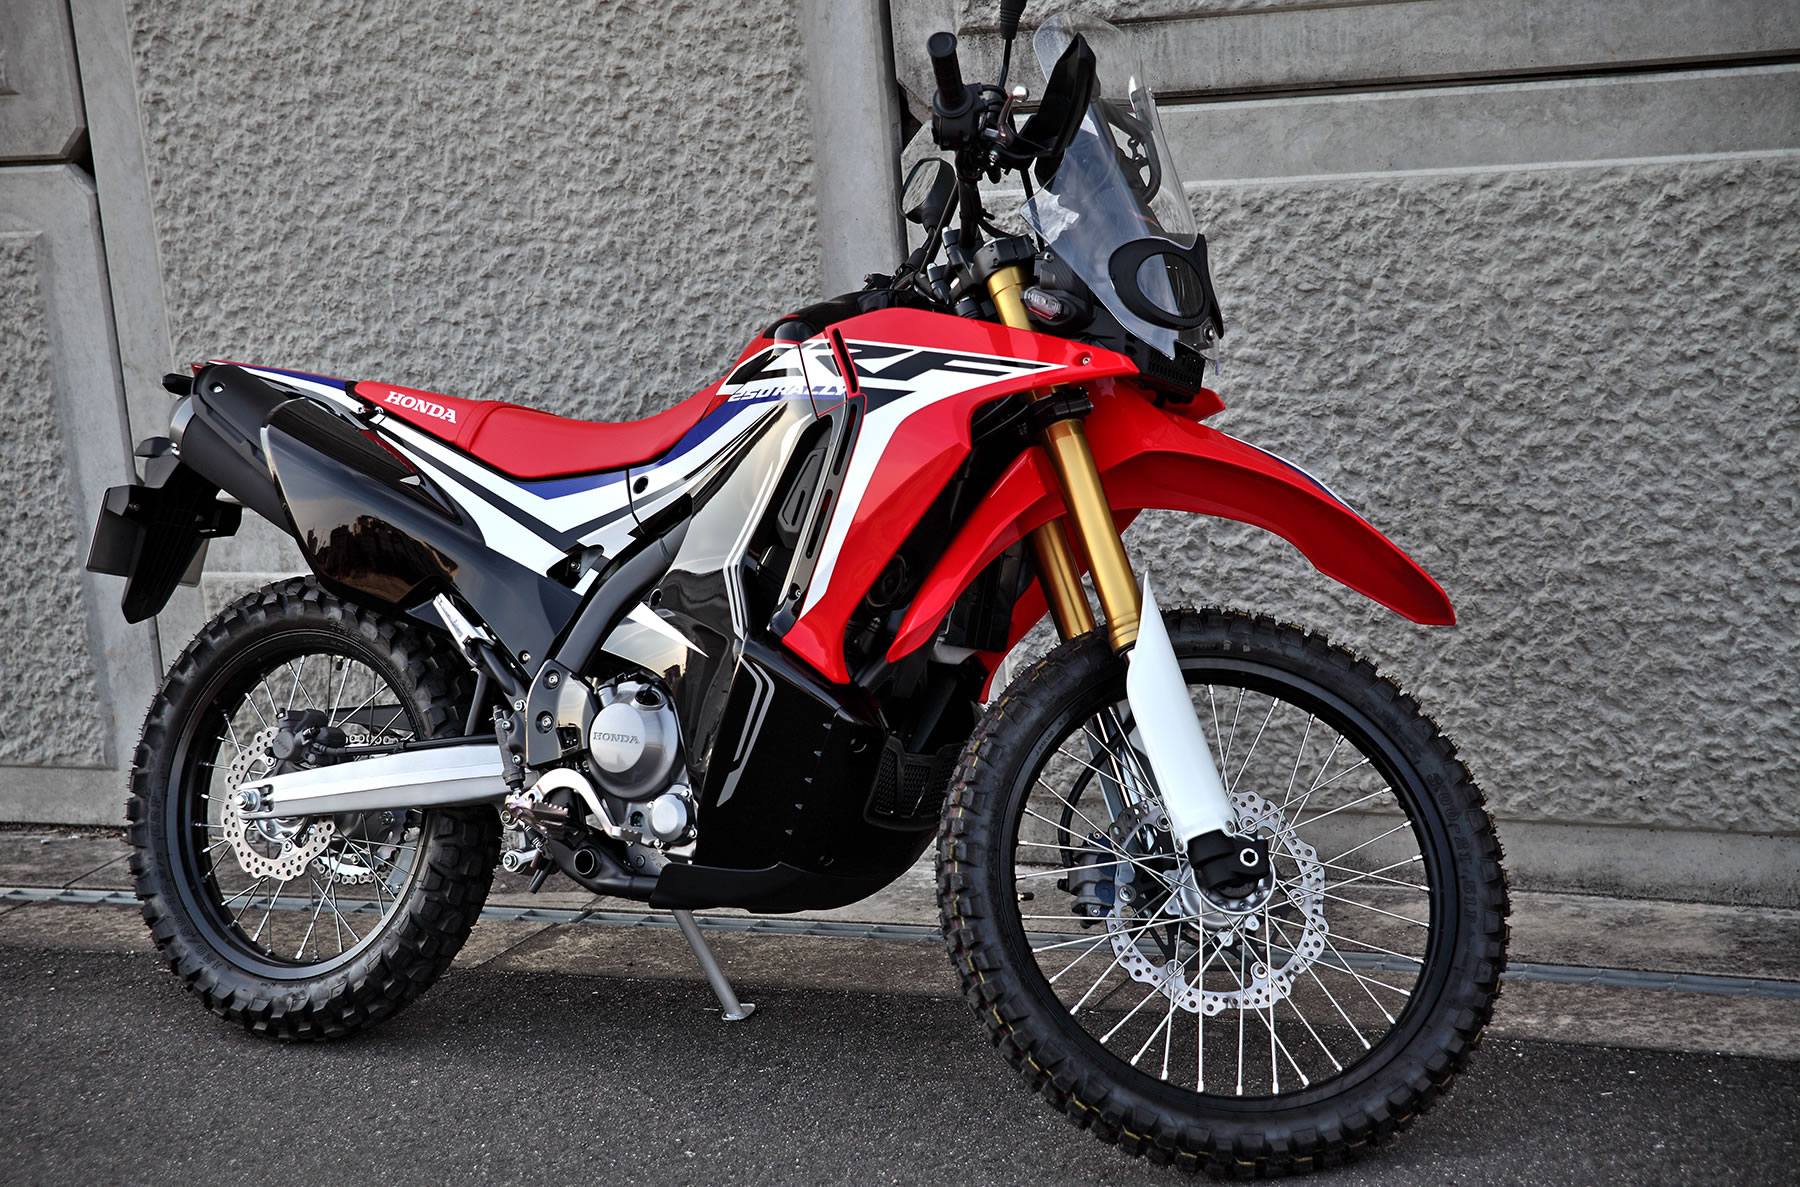 Md44 Crf250rally インプレッション